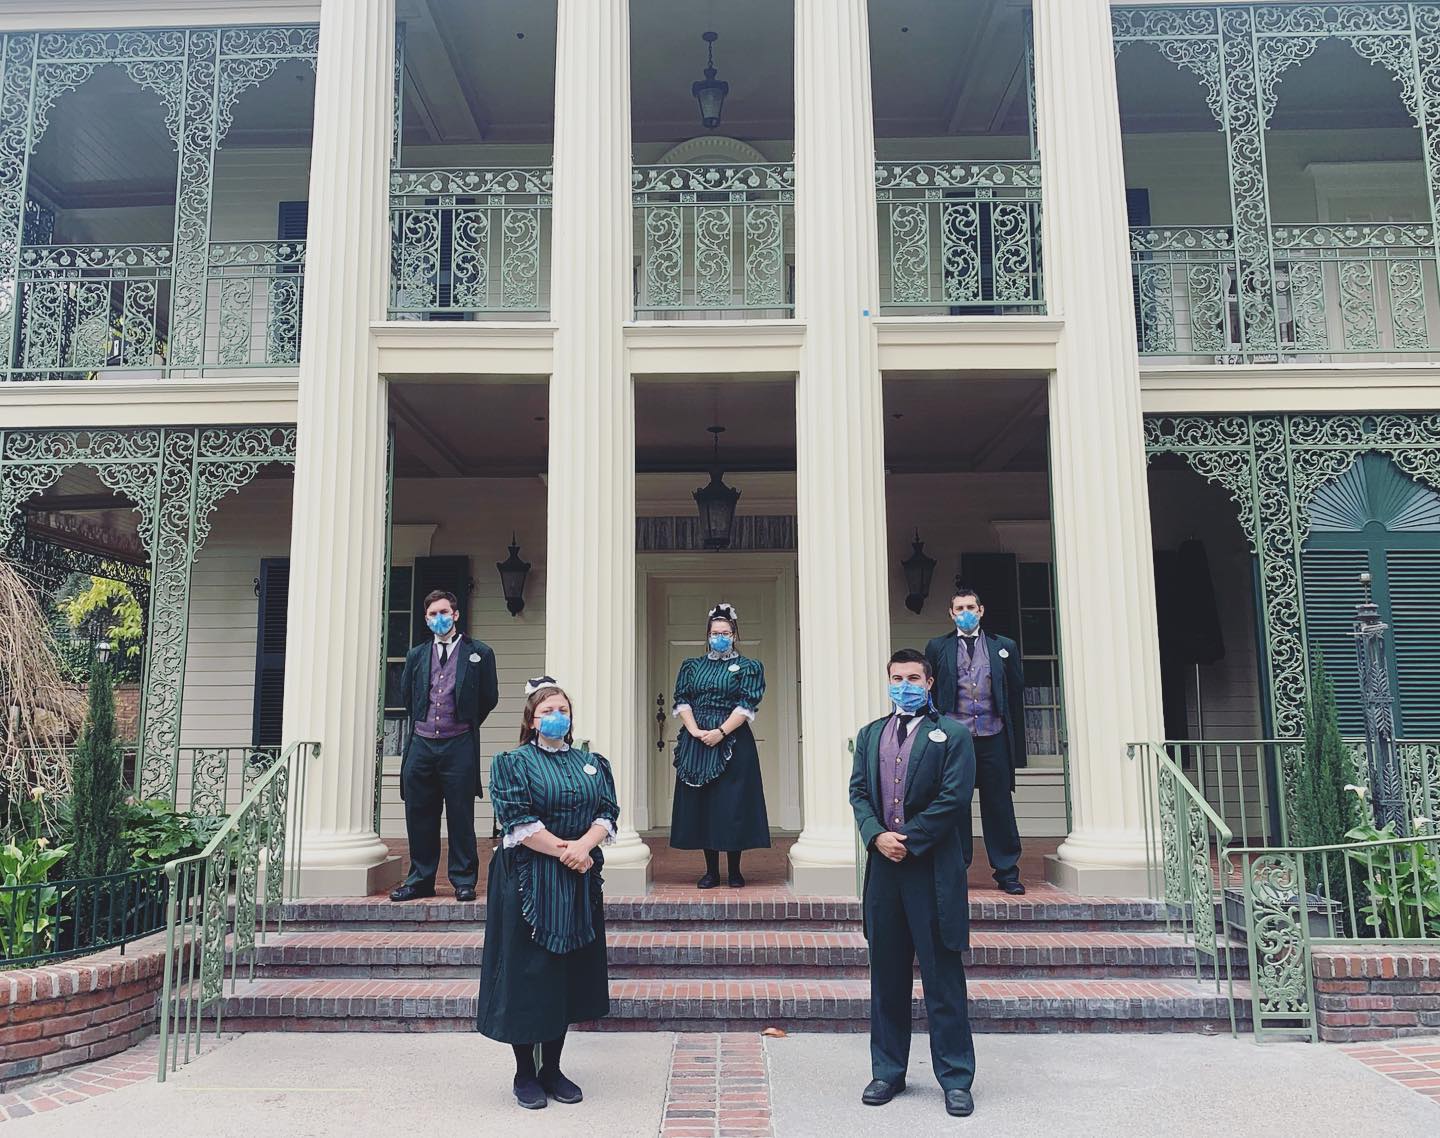 Disneyland Haunted Mansion Cast Members are dying to welcome back guests